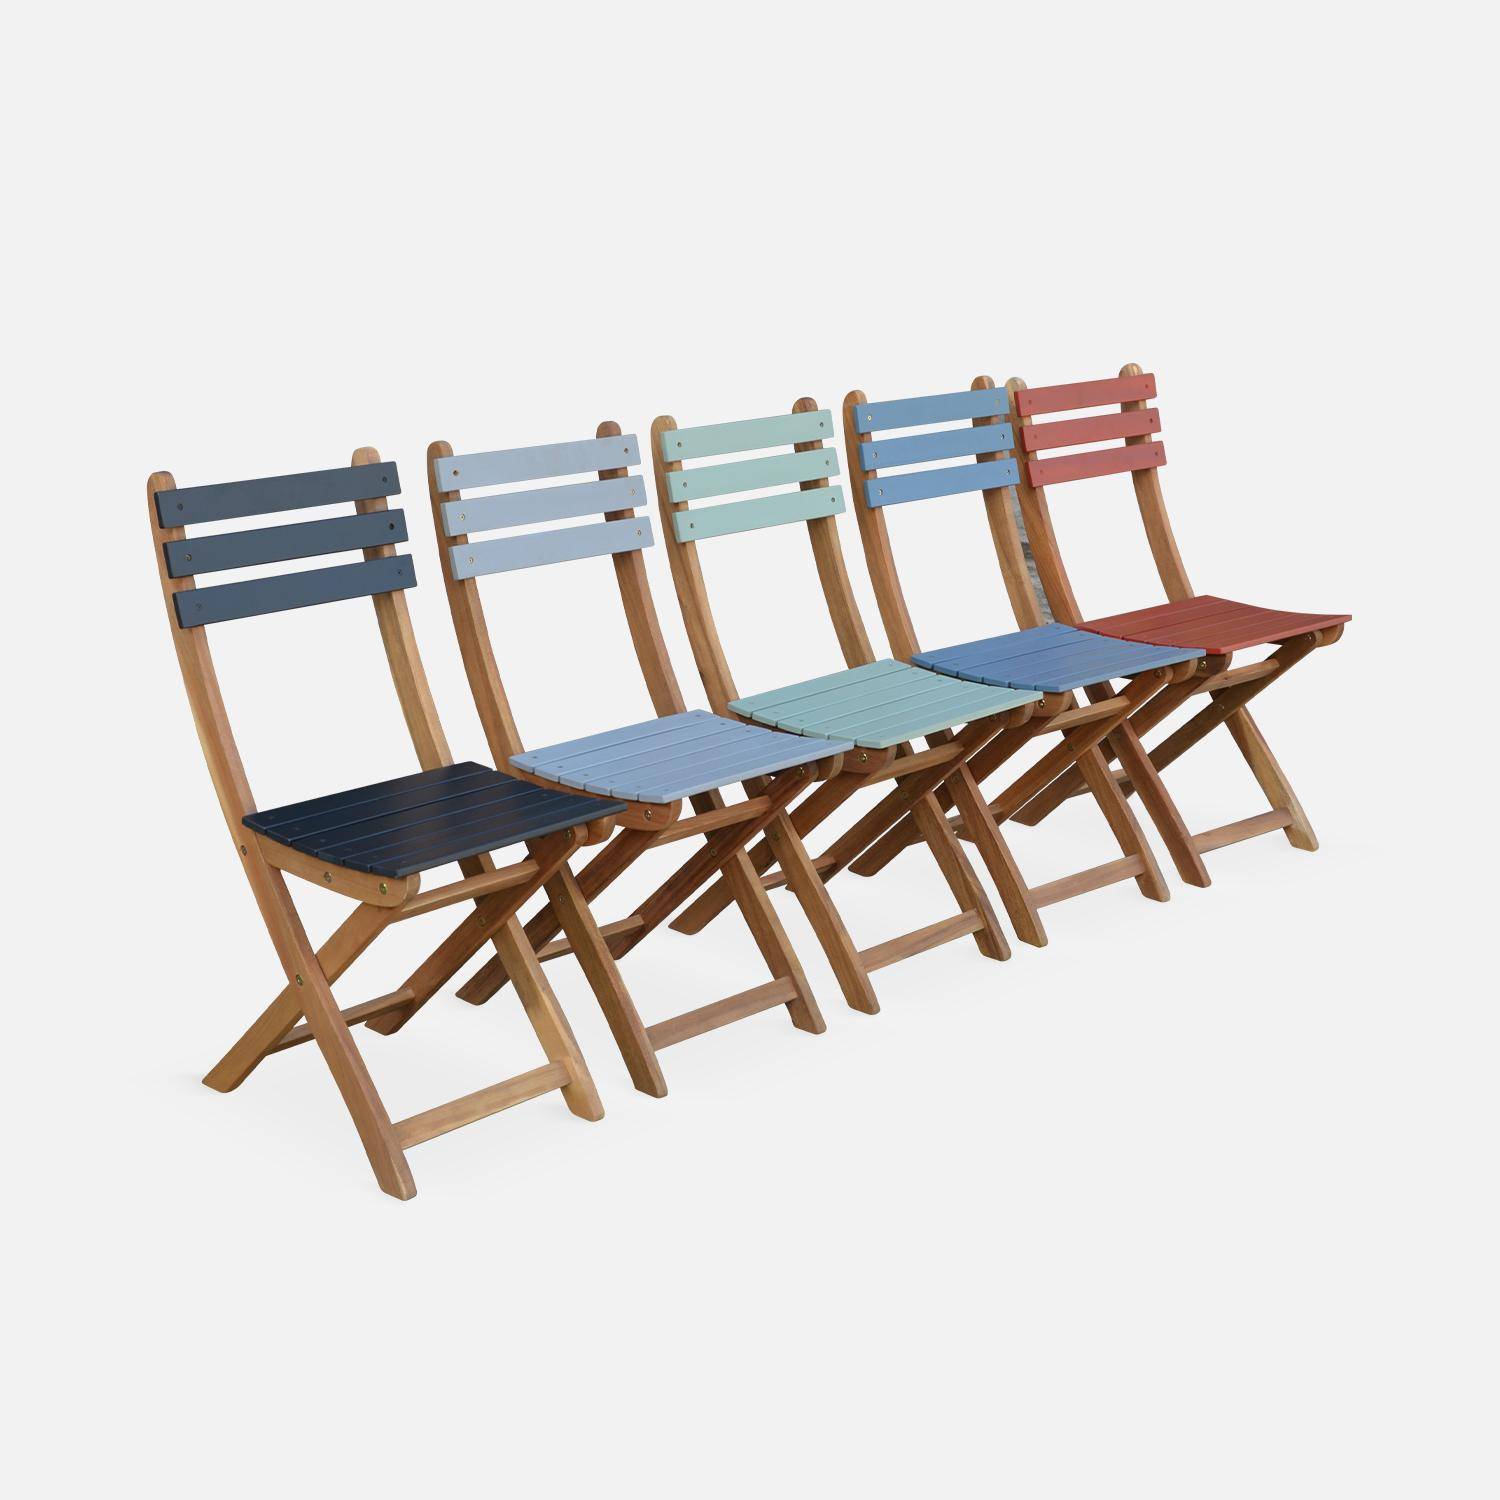 2-seater foldable wooden bistro garden table with chairs, 60x60cm - Barcelona - Terracotta Photo8